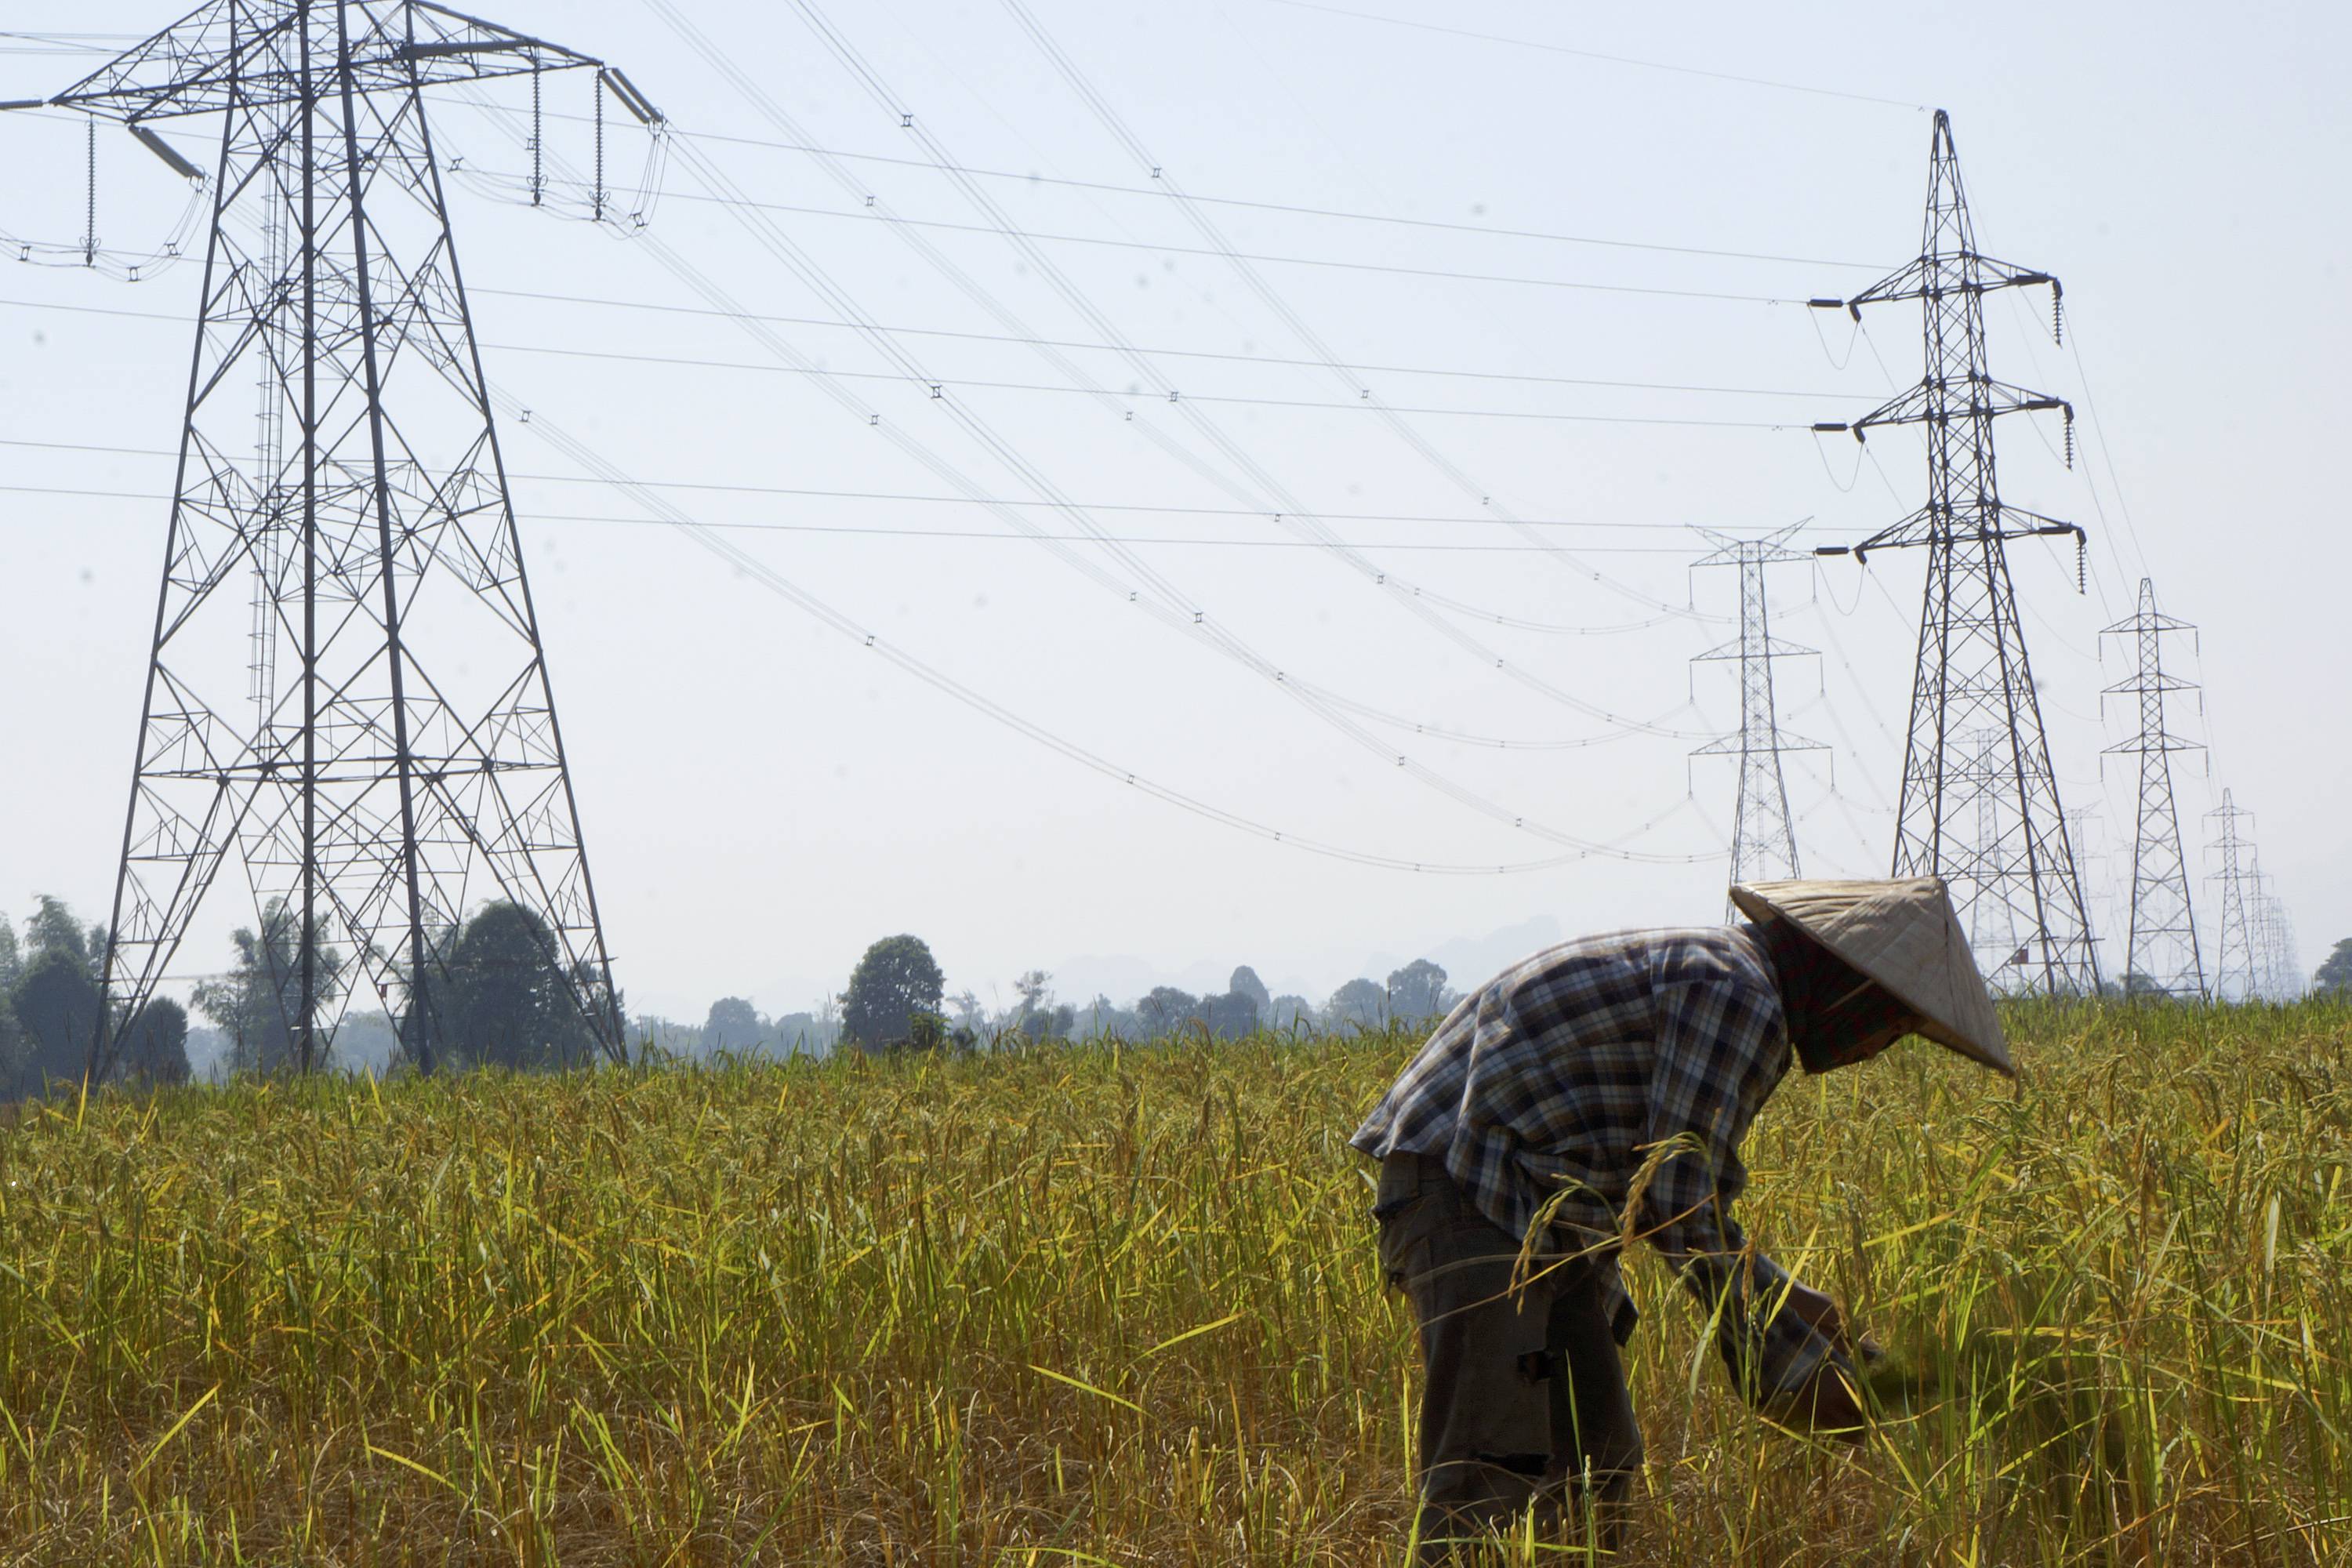 The latest to fall prey to China’s debt-trap diplomacy is Laos, which recently signed a 25-year concession agreement allowing a majority Chinese-owned company to control its national power grid. | REUTERS 